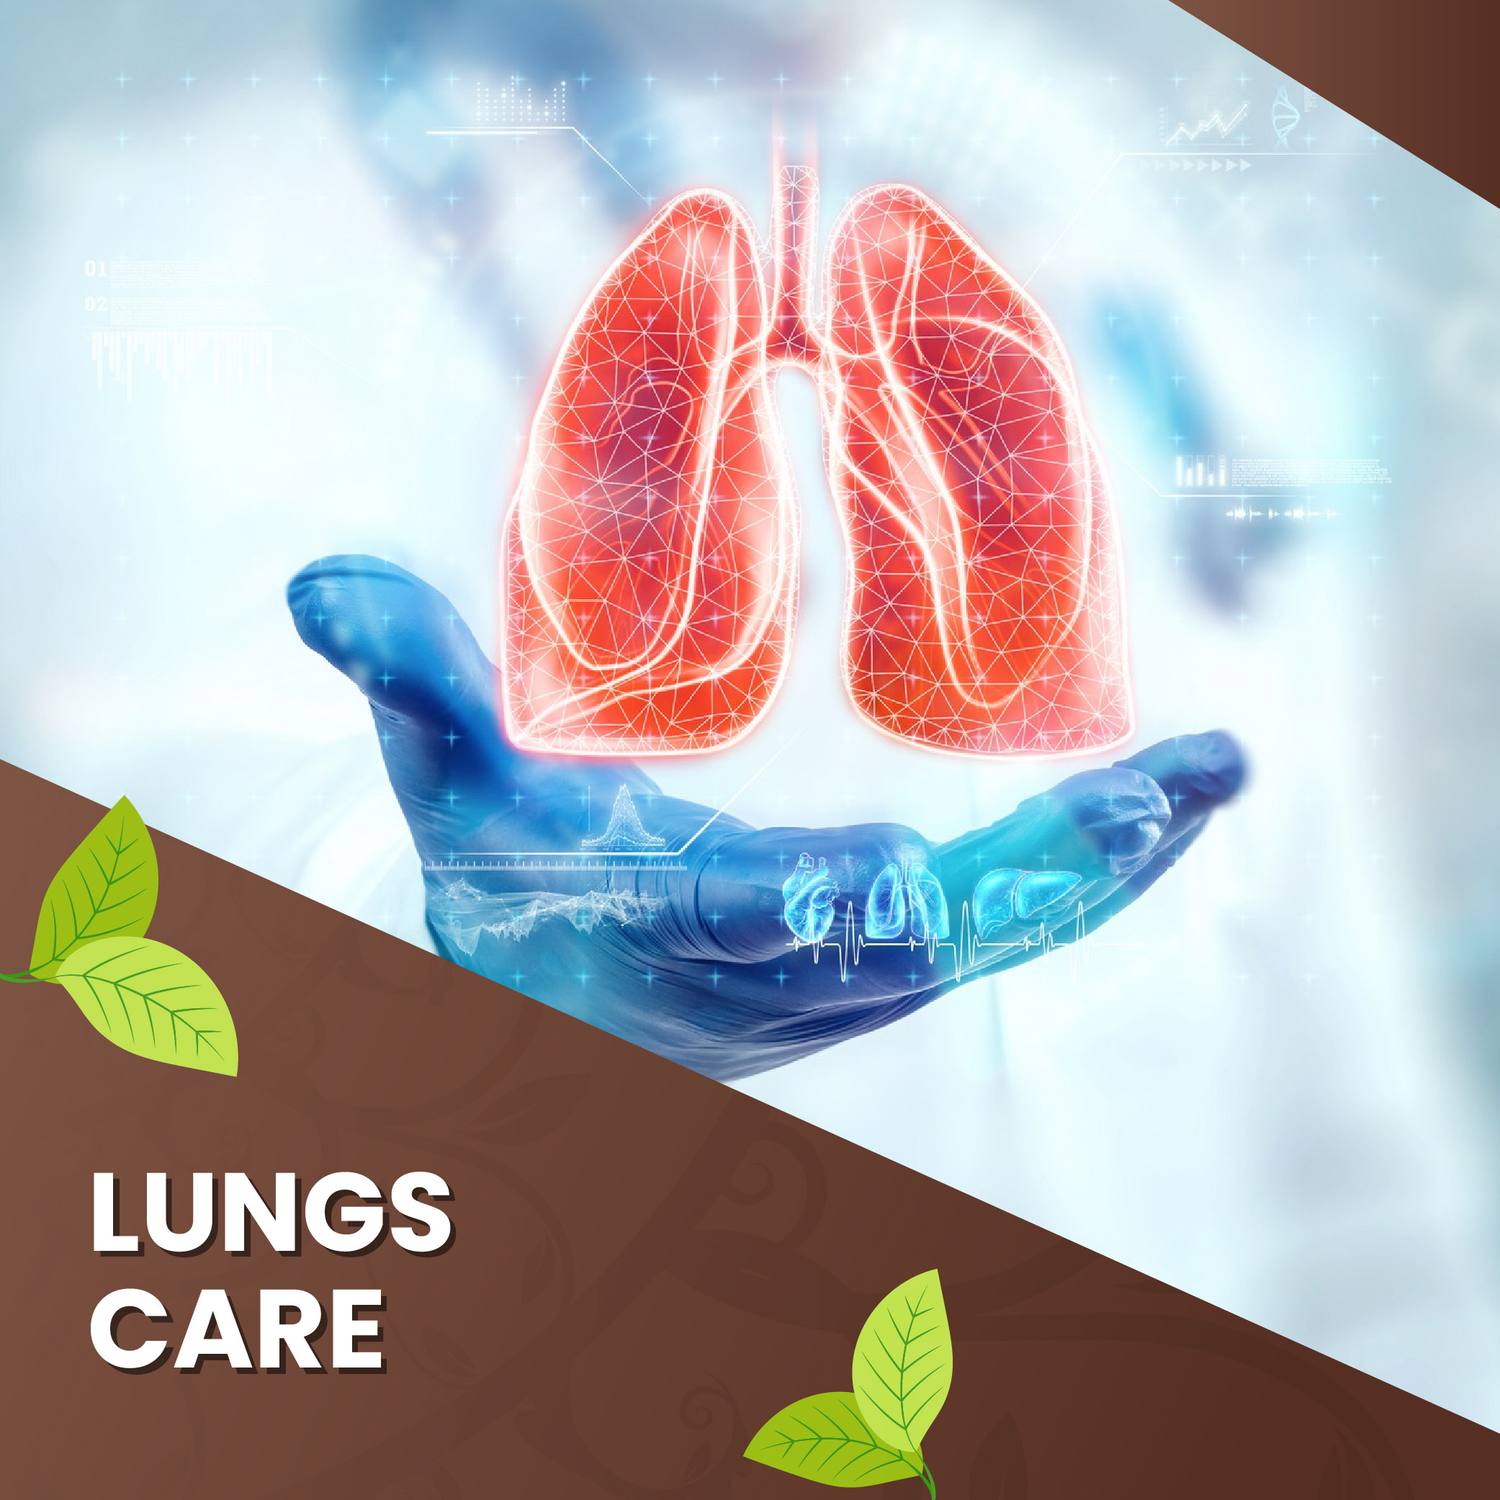 Lungs Care